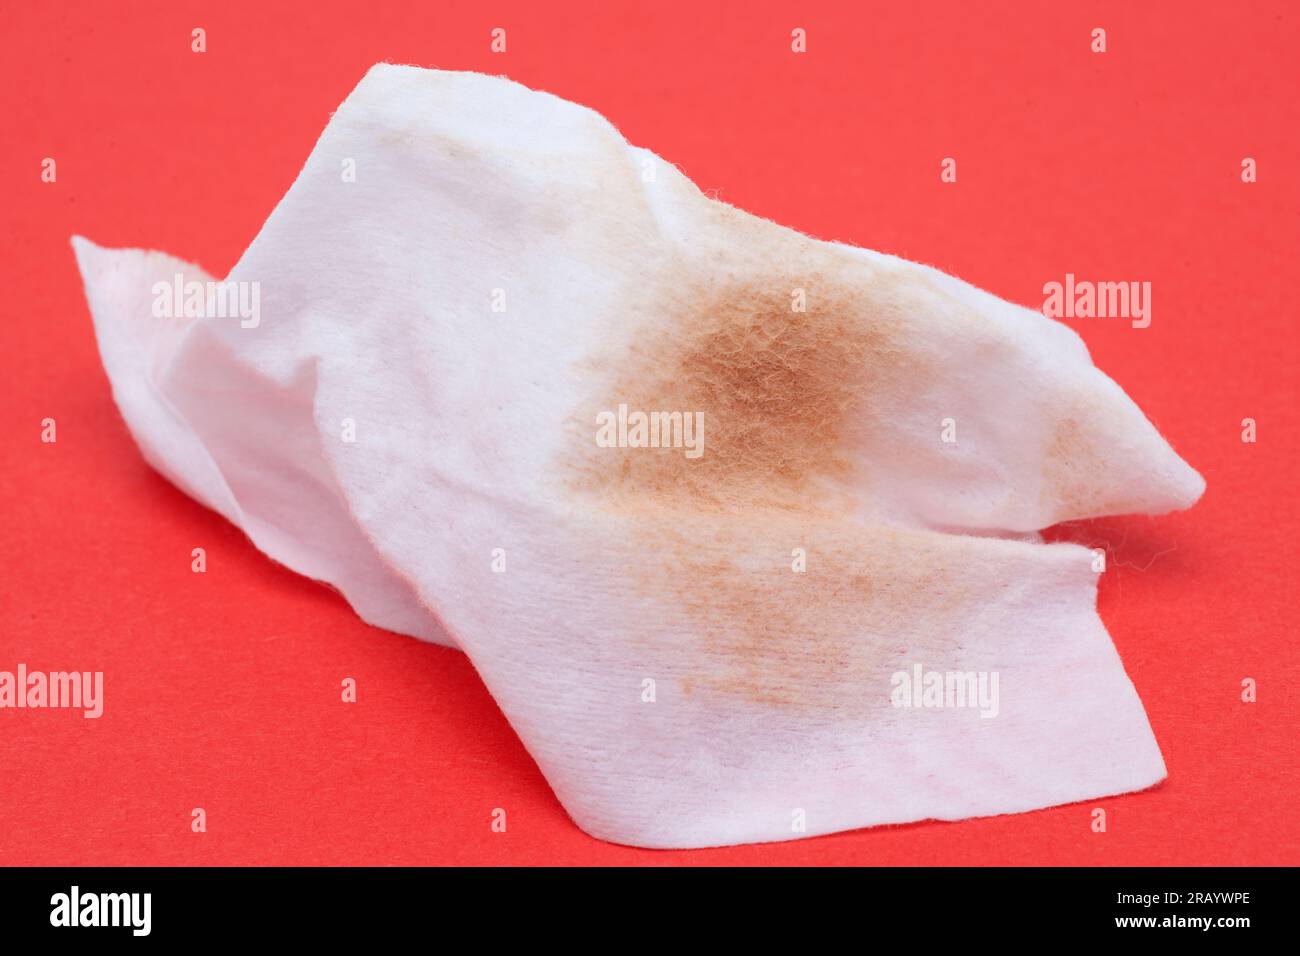 Used Wet Wipe Makeup Remover on a Red Background Stock Photo